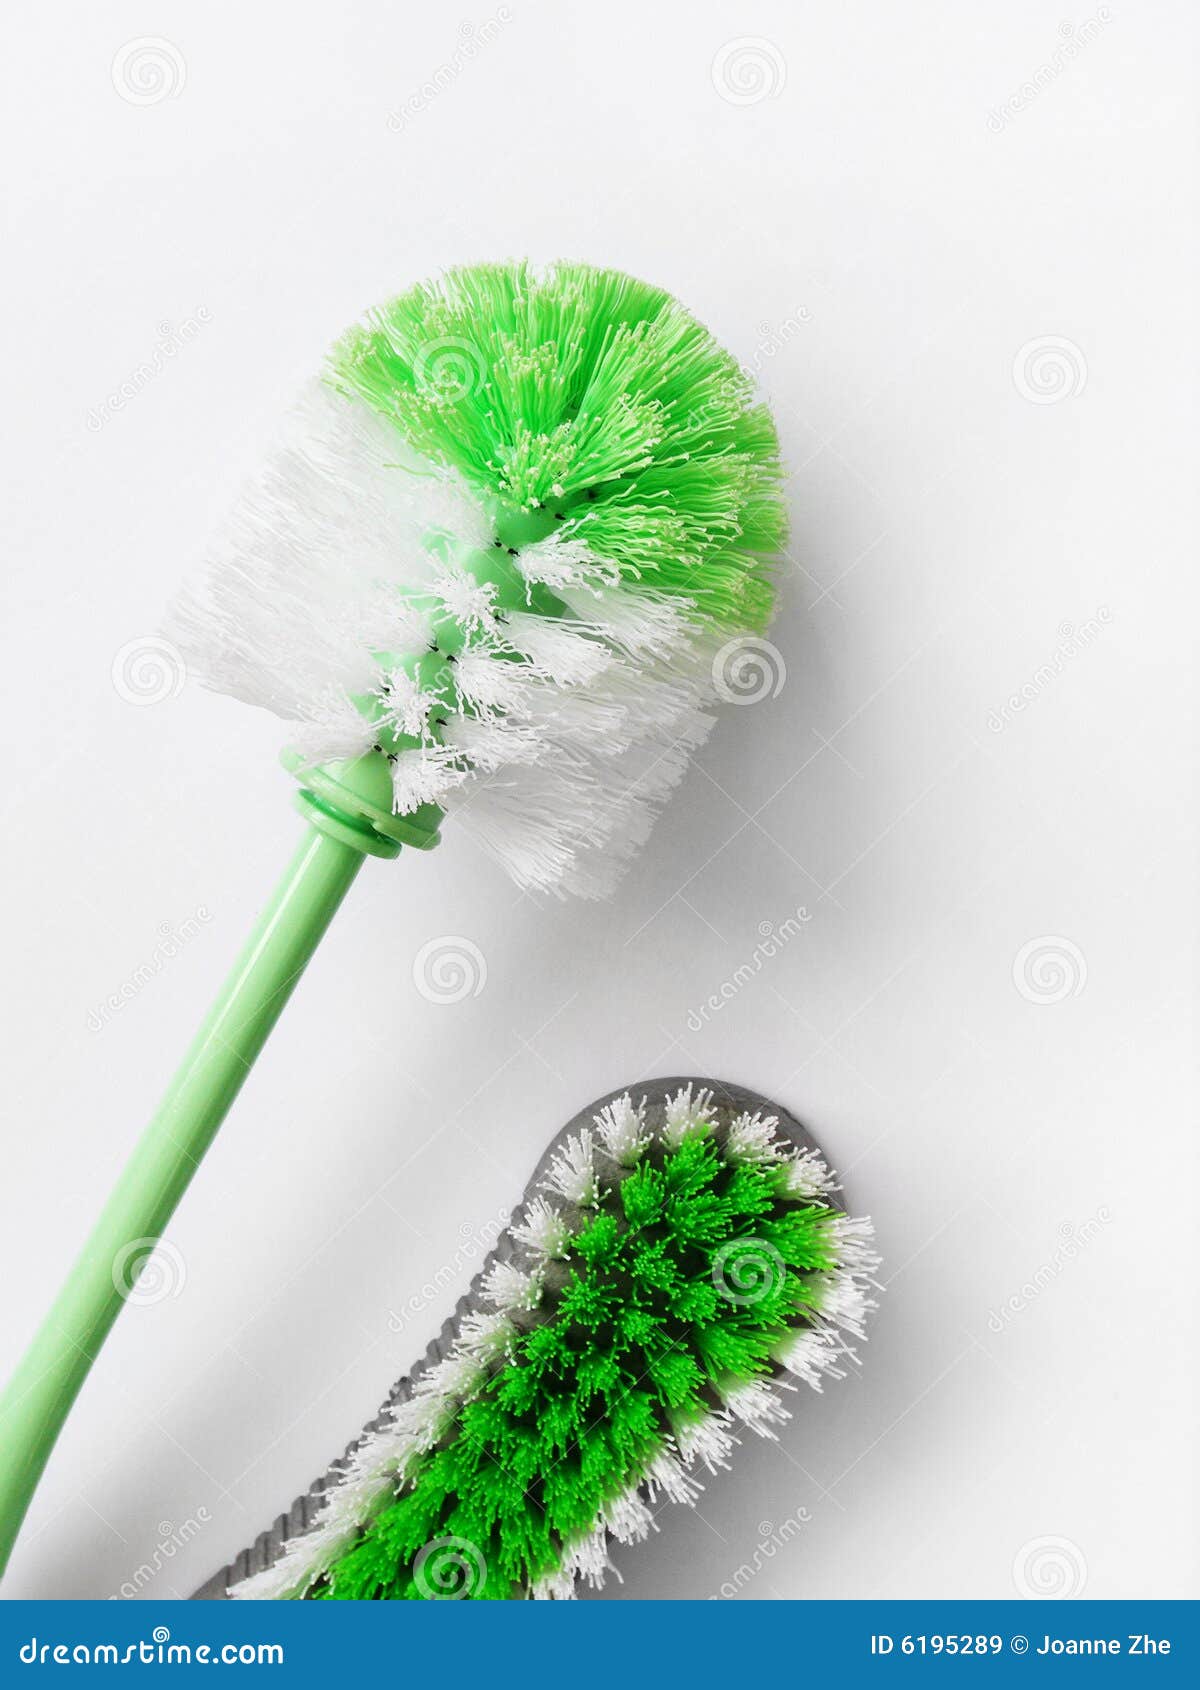 house chores scrubbing cleaning brushes